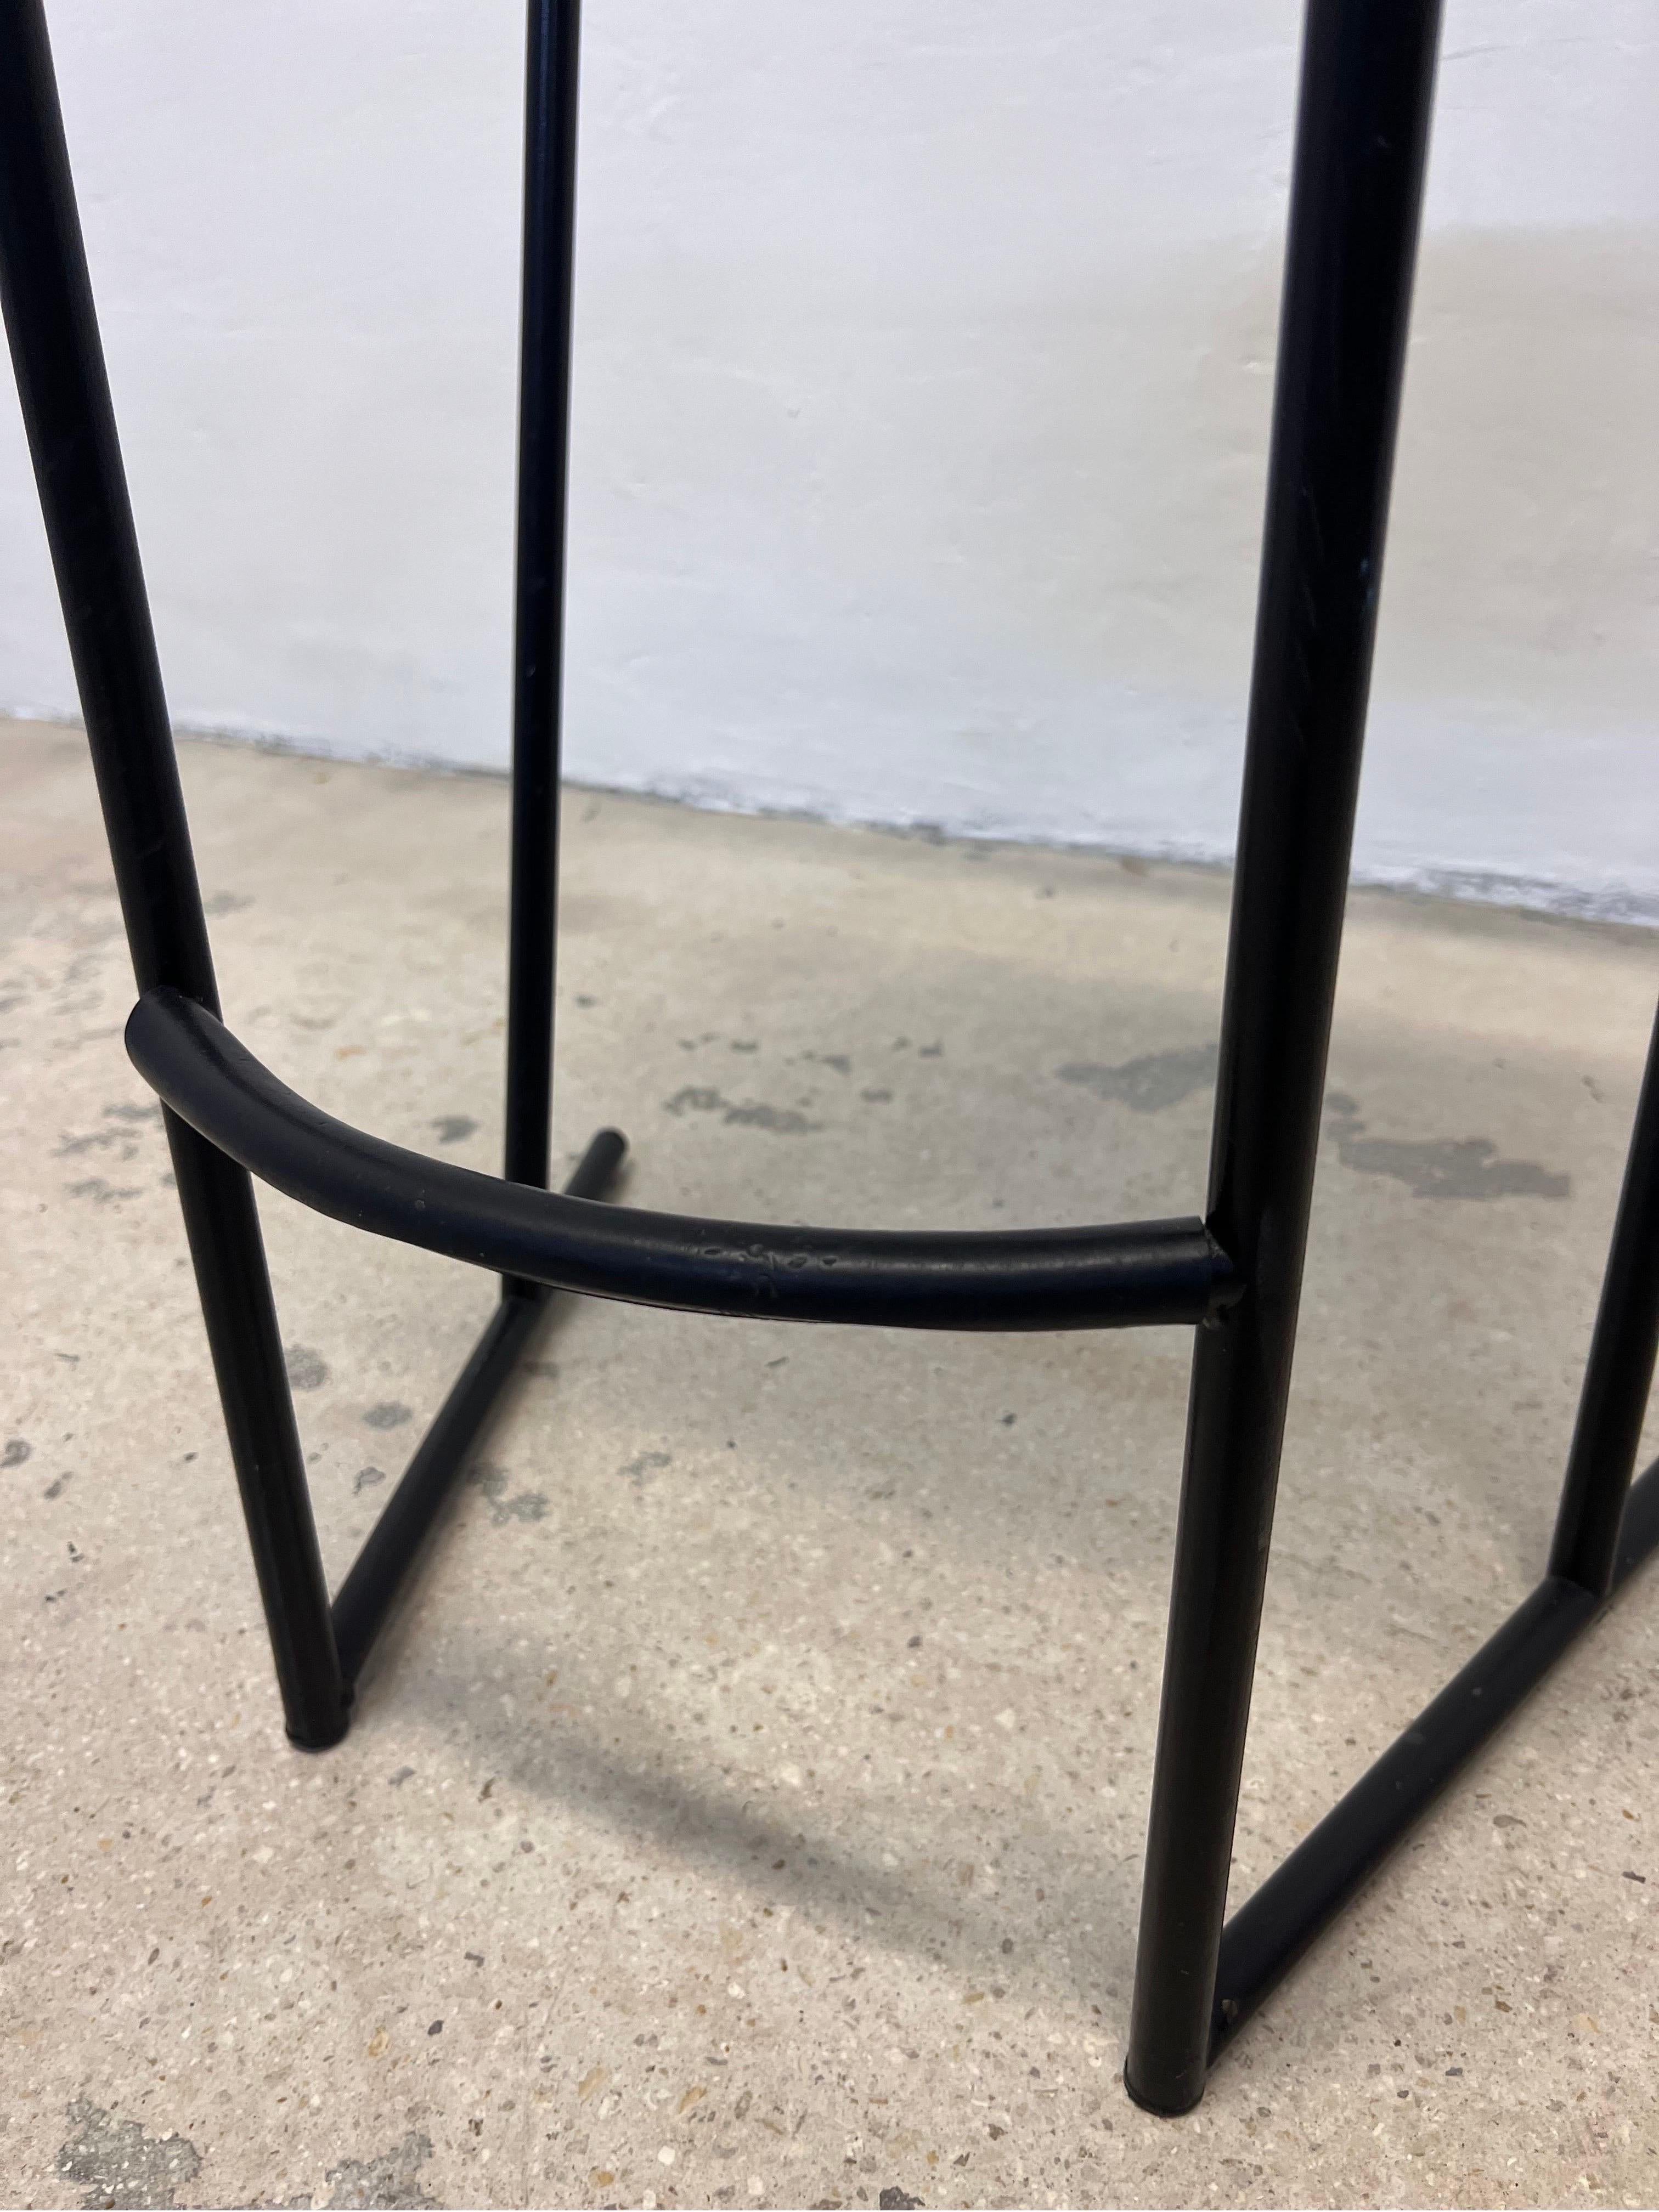 Emilio Nanni Musmé Counter Stool for Fly Line, 1984 For Sale 2